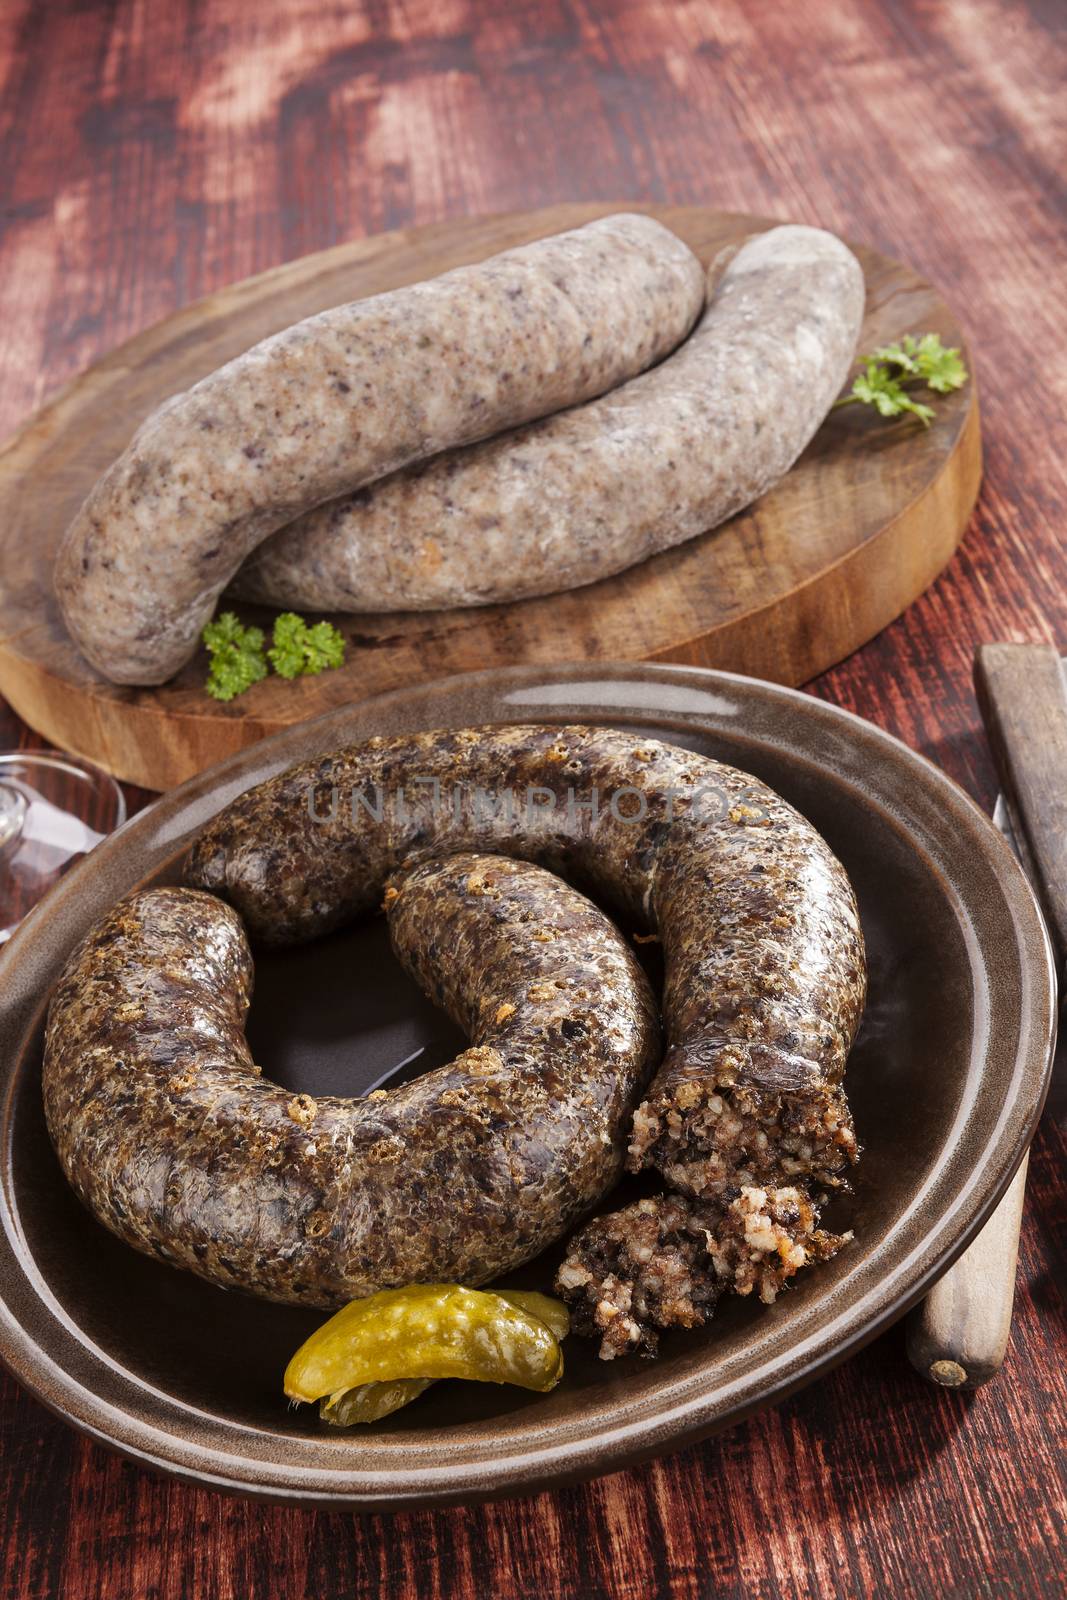 Blood sausage and rice sausage on wooden background. Culinary traditional european eating, rustic style.